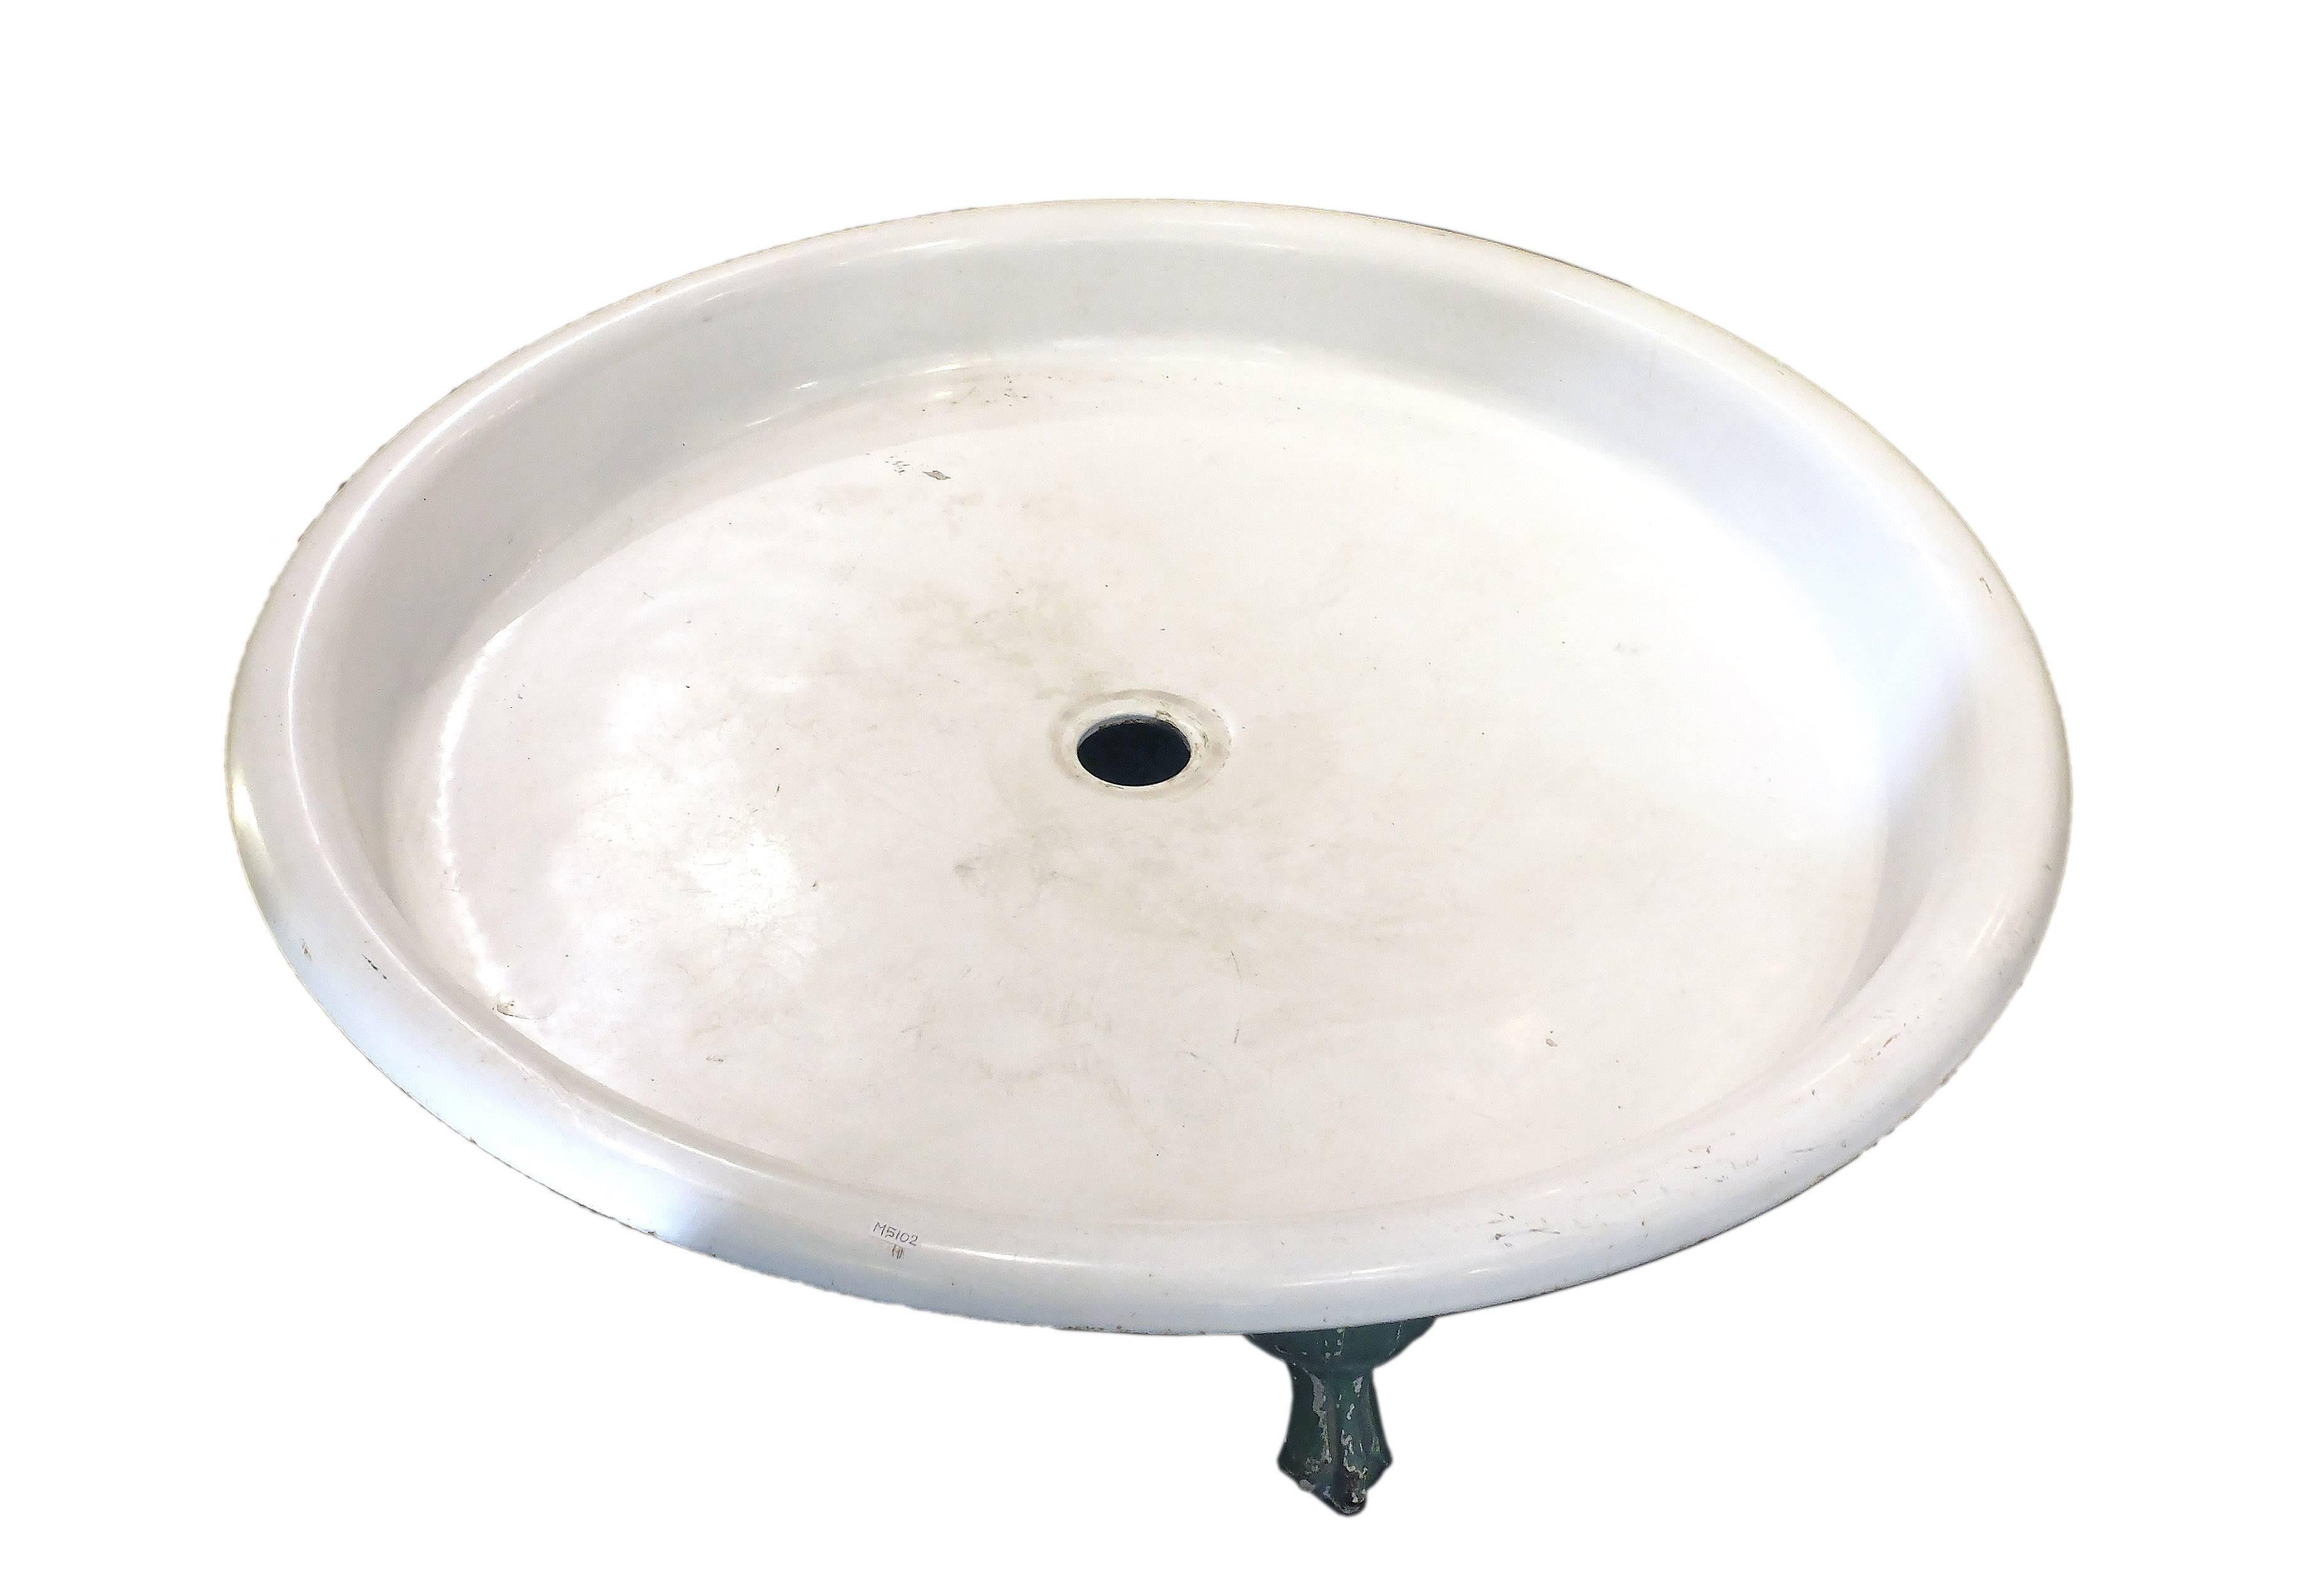 Unusual round-shaped shower tray in white cast iron with four feet in the shape of a paw. Cast iron, green painting in the front, France, circa 1900.